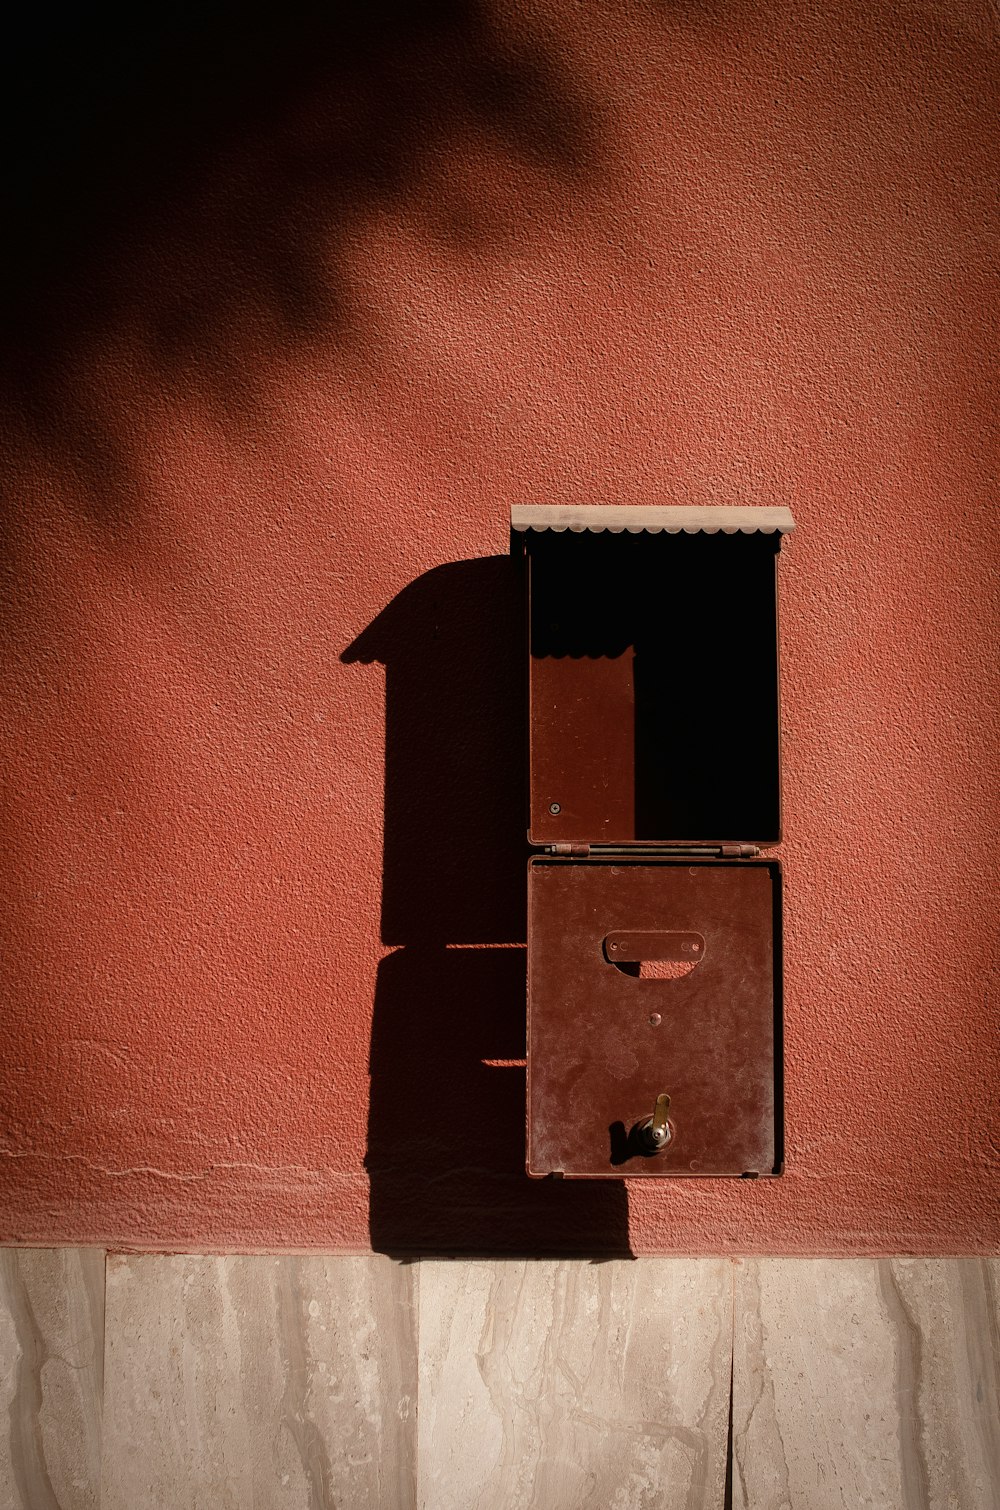 the shadow of a wall mounted mailbox on the side of a building